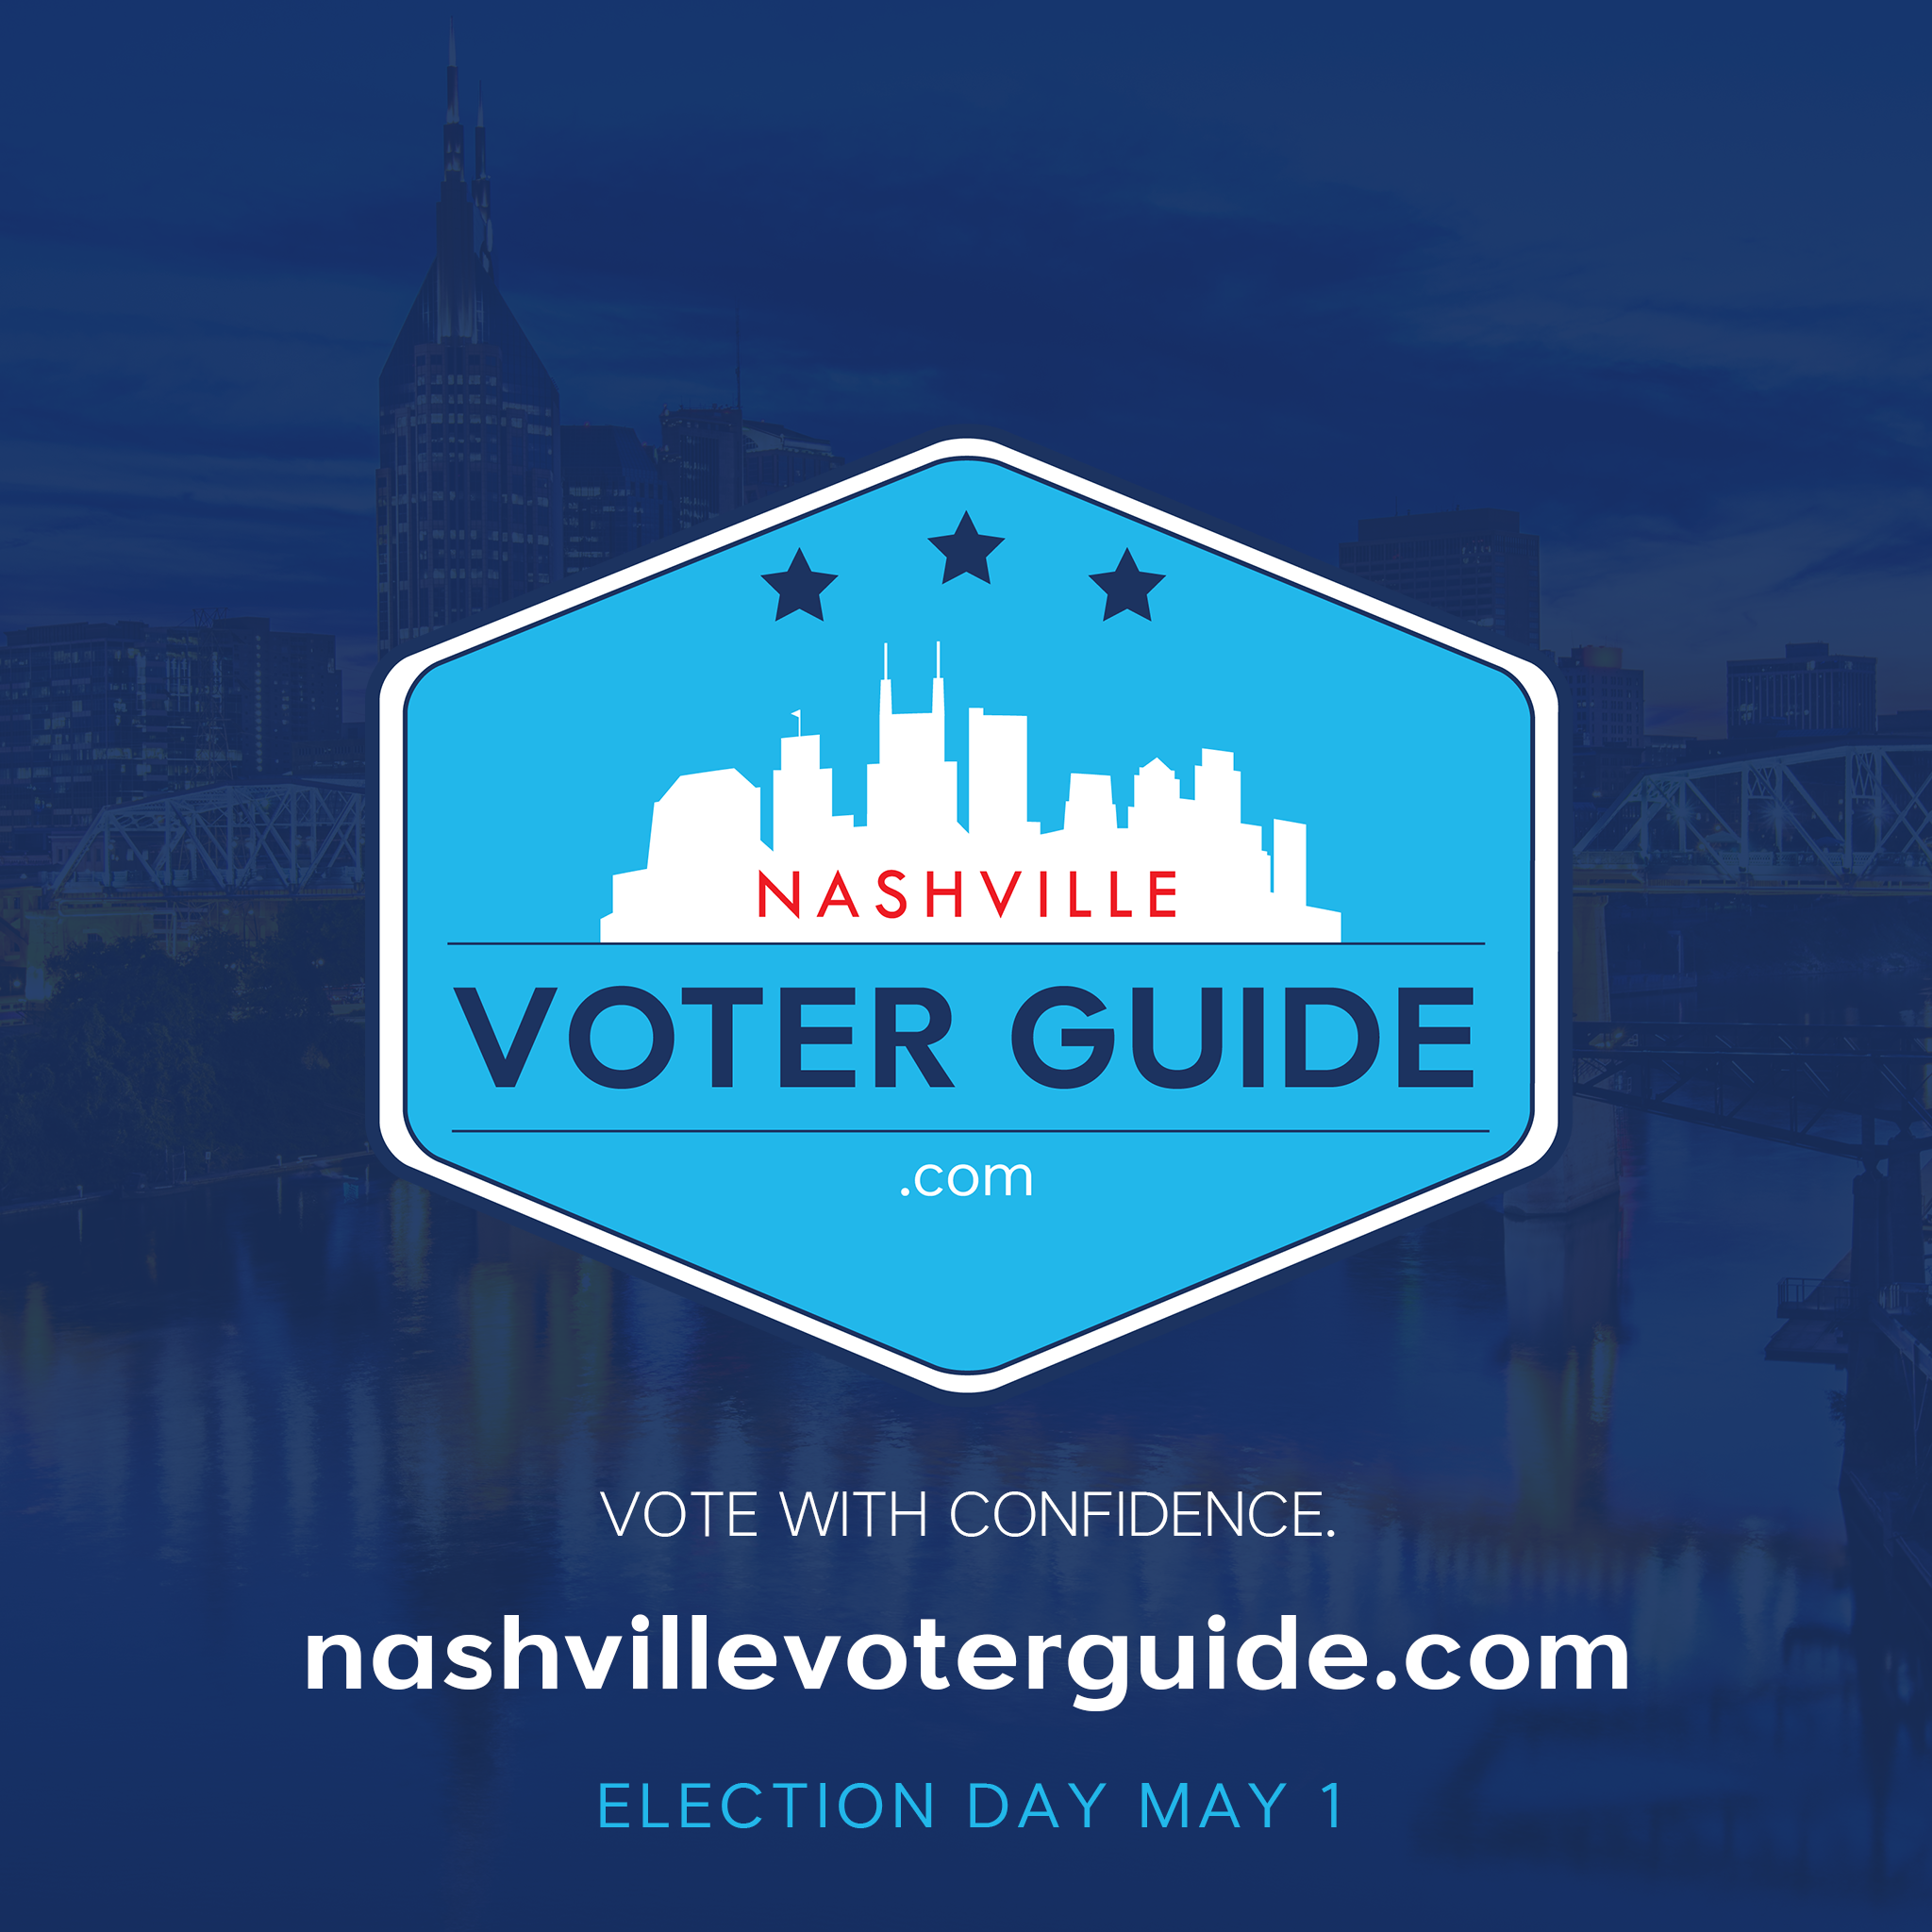 THE EQUITY ALLIANCE RELEASES NASHVILLE VOTER GUIDE TODAY, TO HOST ‘GET OUT THE VOTE’ BLOCK PARTY FOMAY 1 ELECTION